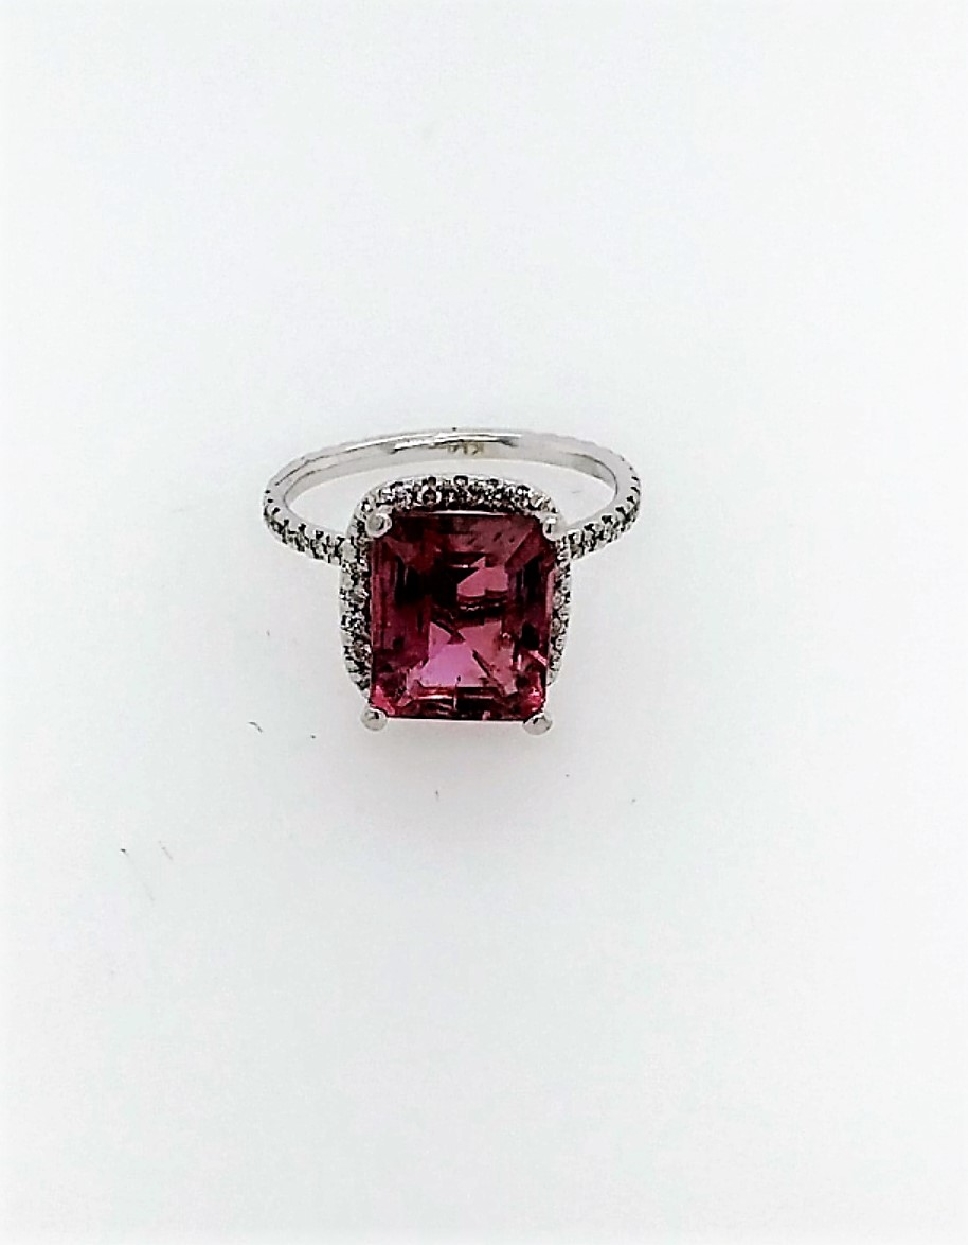 14k White Gold Ring with Emerald Cut Pink Tourmaline and Diamond Halo size 6.5
4.21 CT Pink Tourmaline
0.30CTTW diamonds

Comes with Jewelry Appraisal